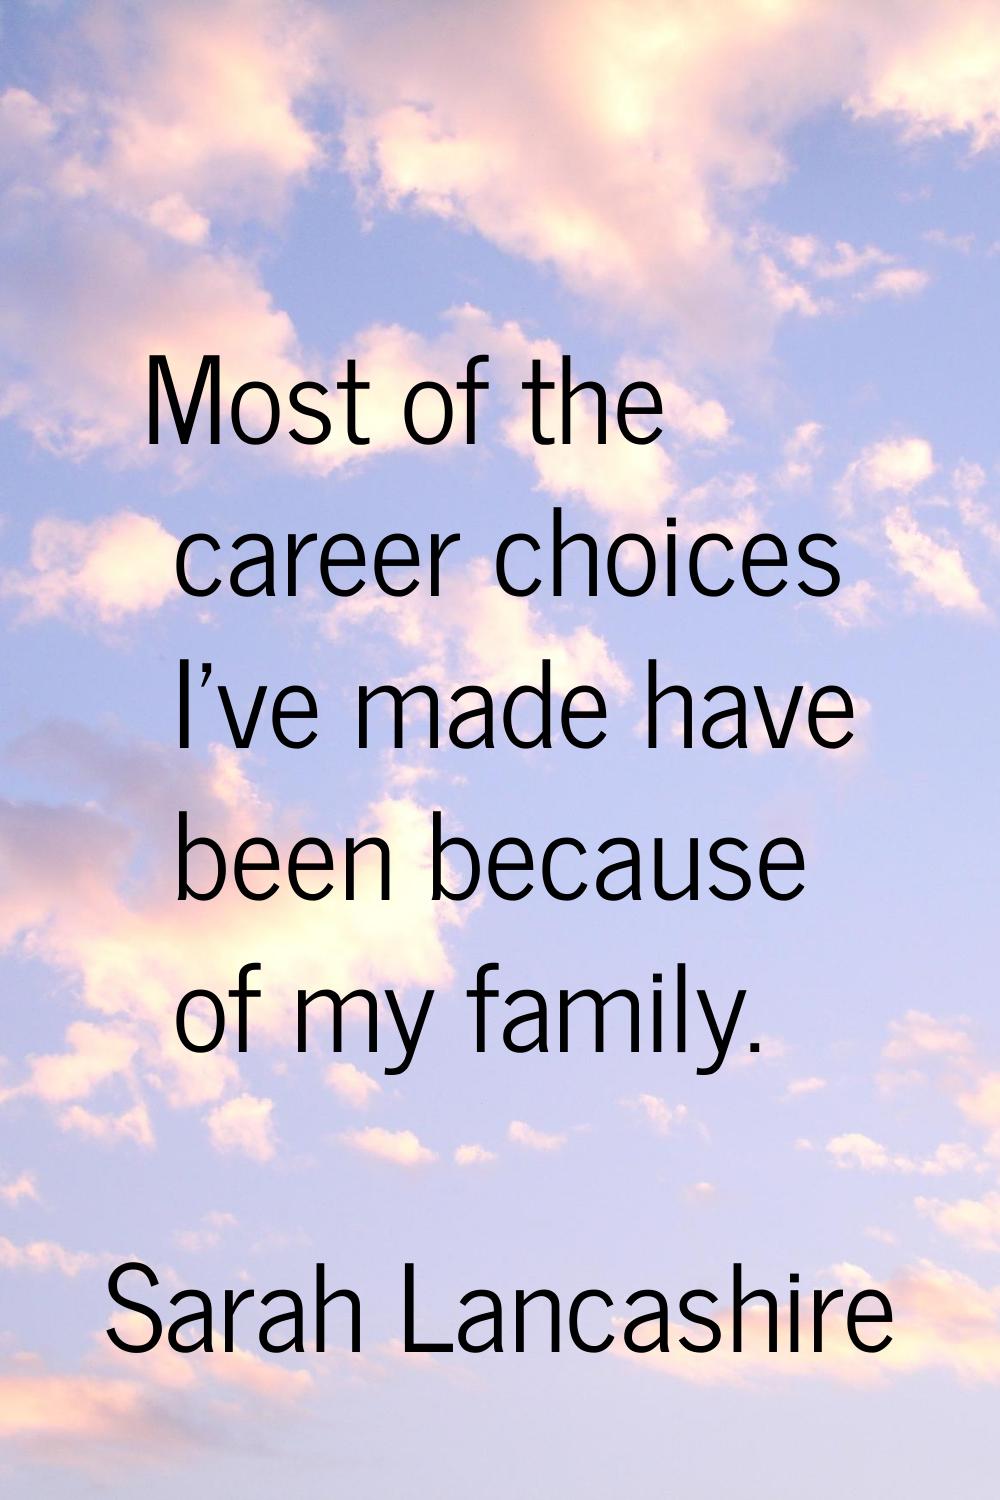 Most of the career choices I've made have been because of my family.